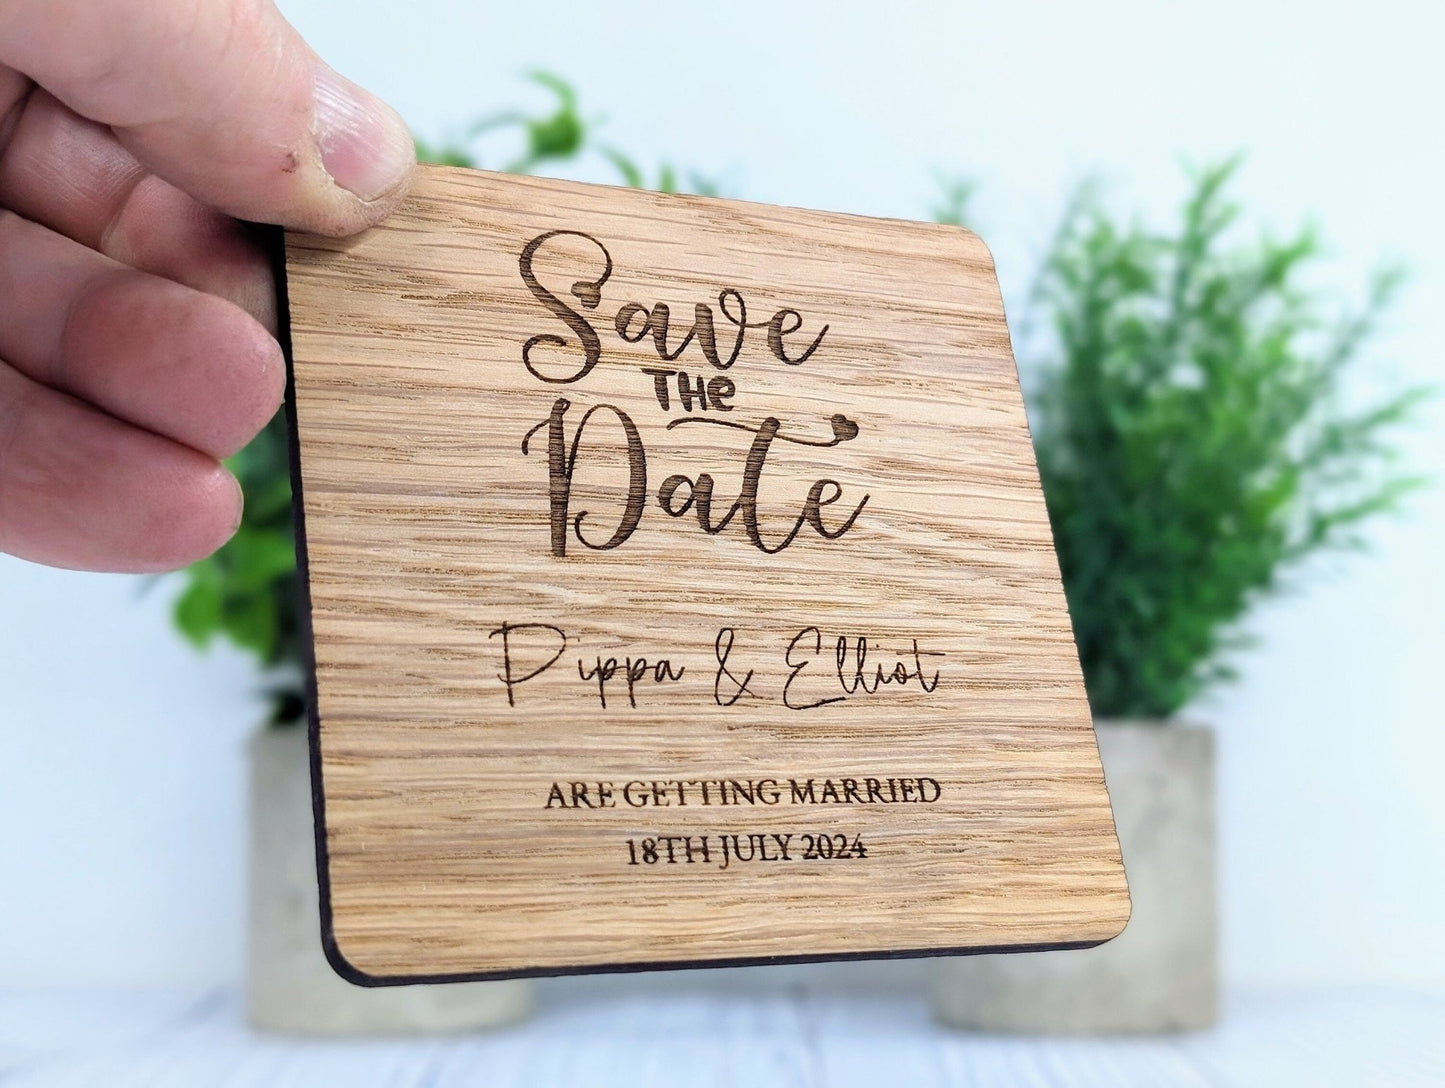 Bespoke 'Save The Date' Oak Veneered Coasters - Custom with Names & Date, 90mm x 90mm, Unique Personalised Wooden Wedding Favours - CherryGroveCraft